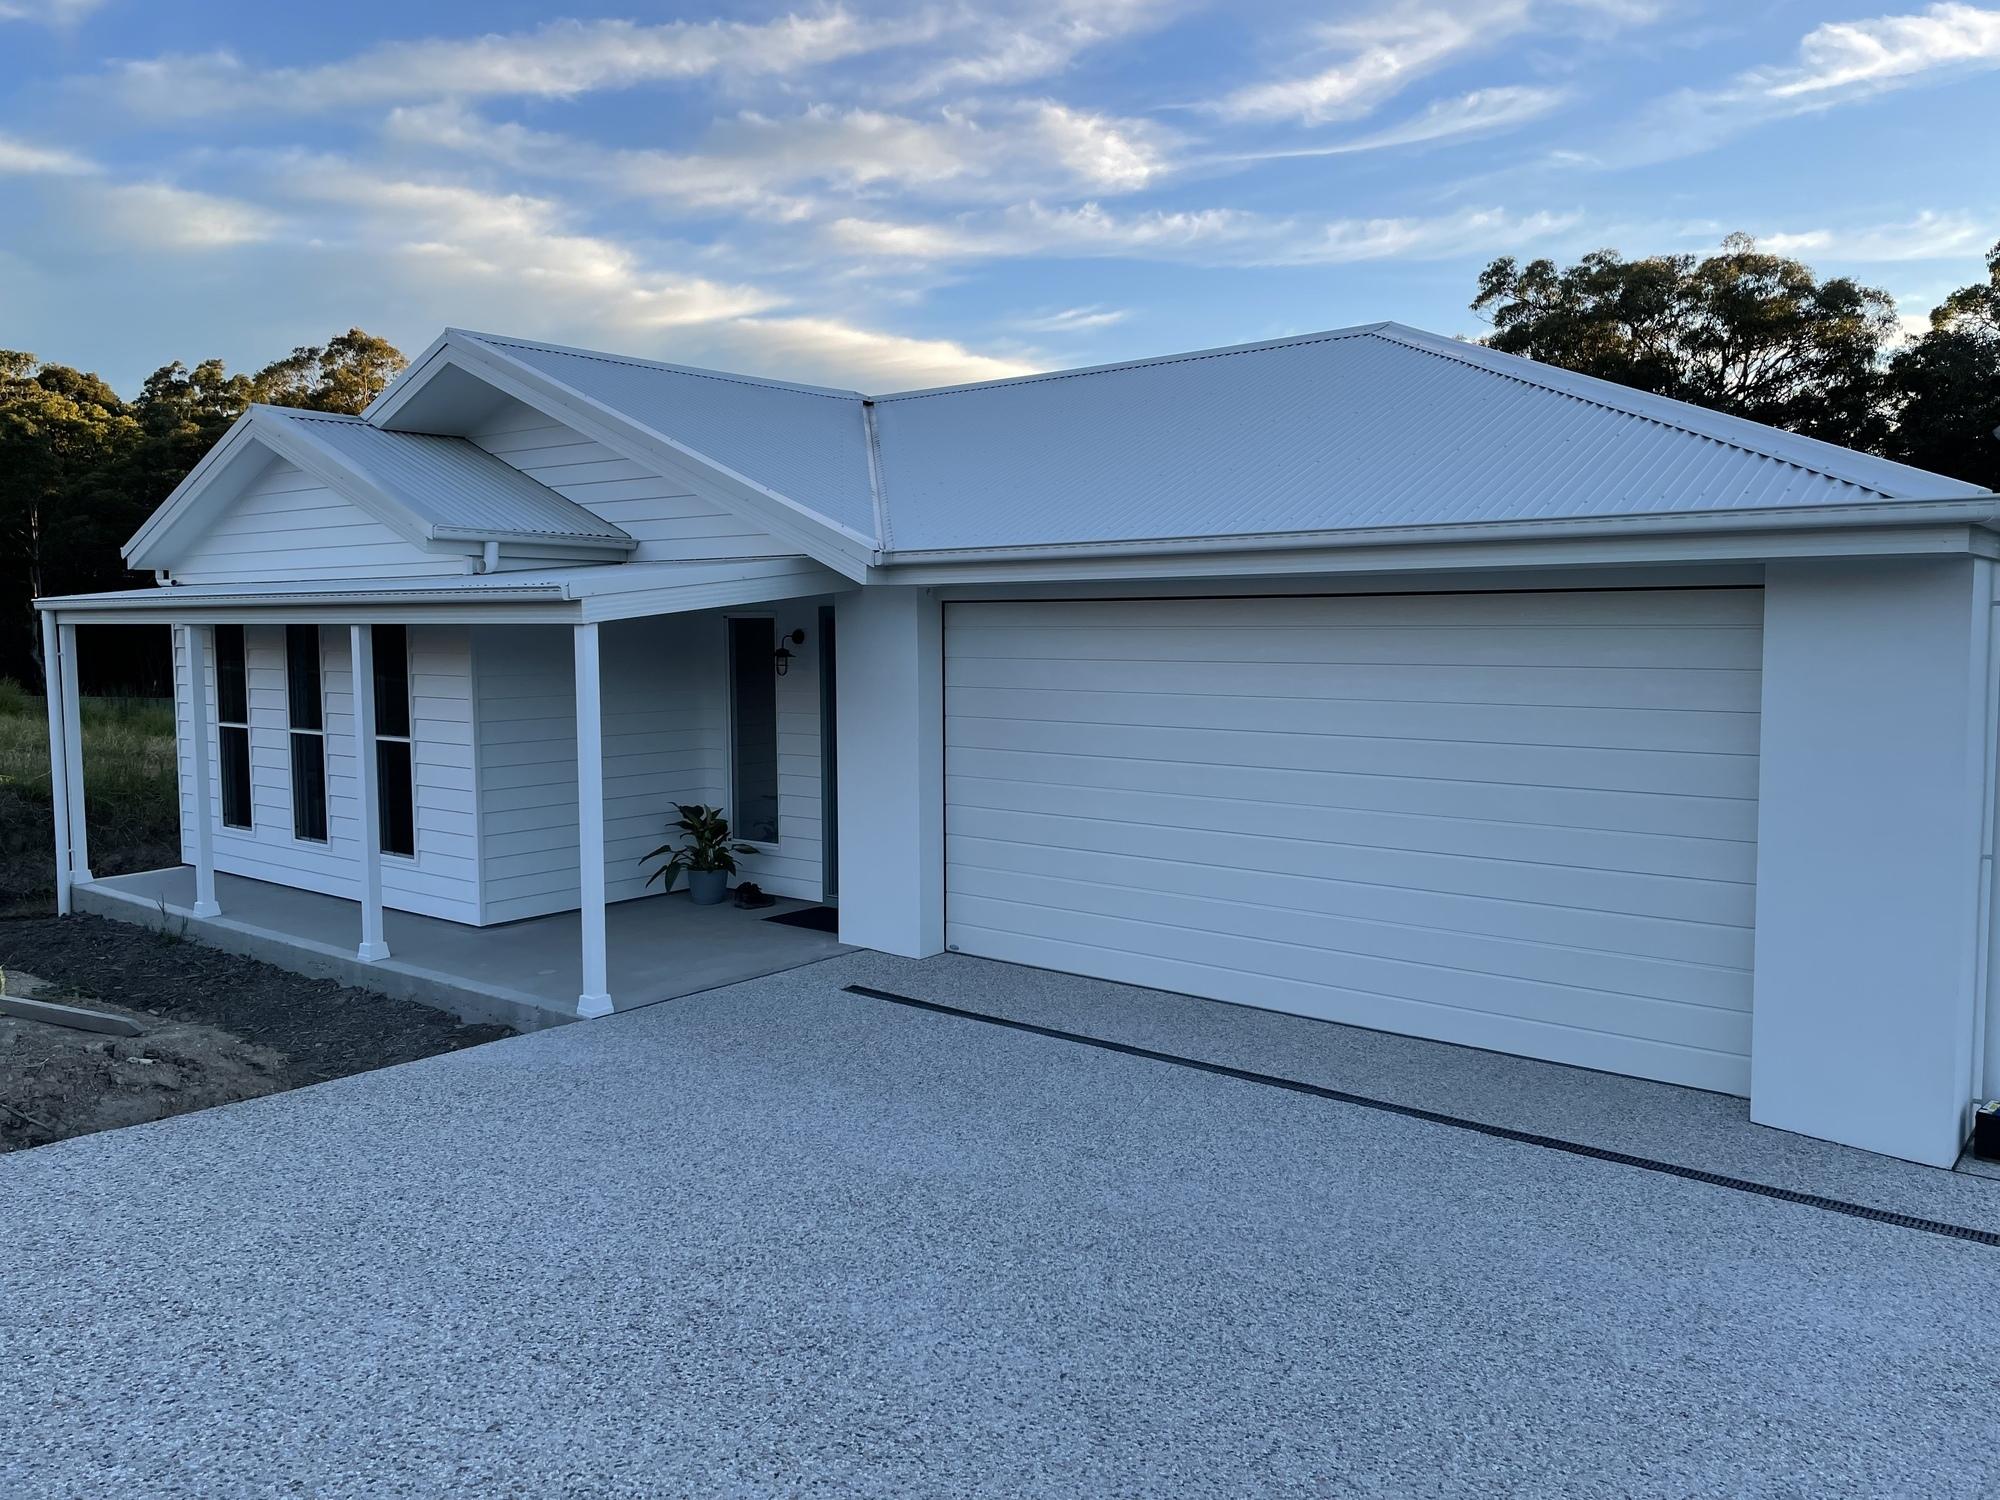 Kylie from Eleebana, NSW loves COLORBOND® steel. Roofing, Guttering & Fascia, Garage Doors made from COLORBOND® steel in colour Surfmist®